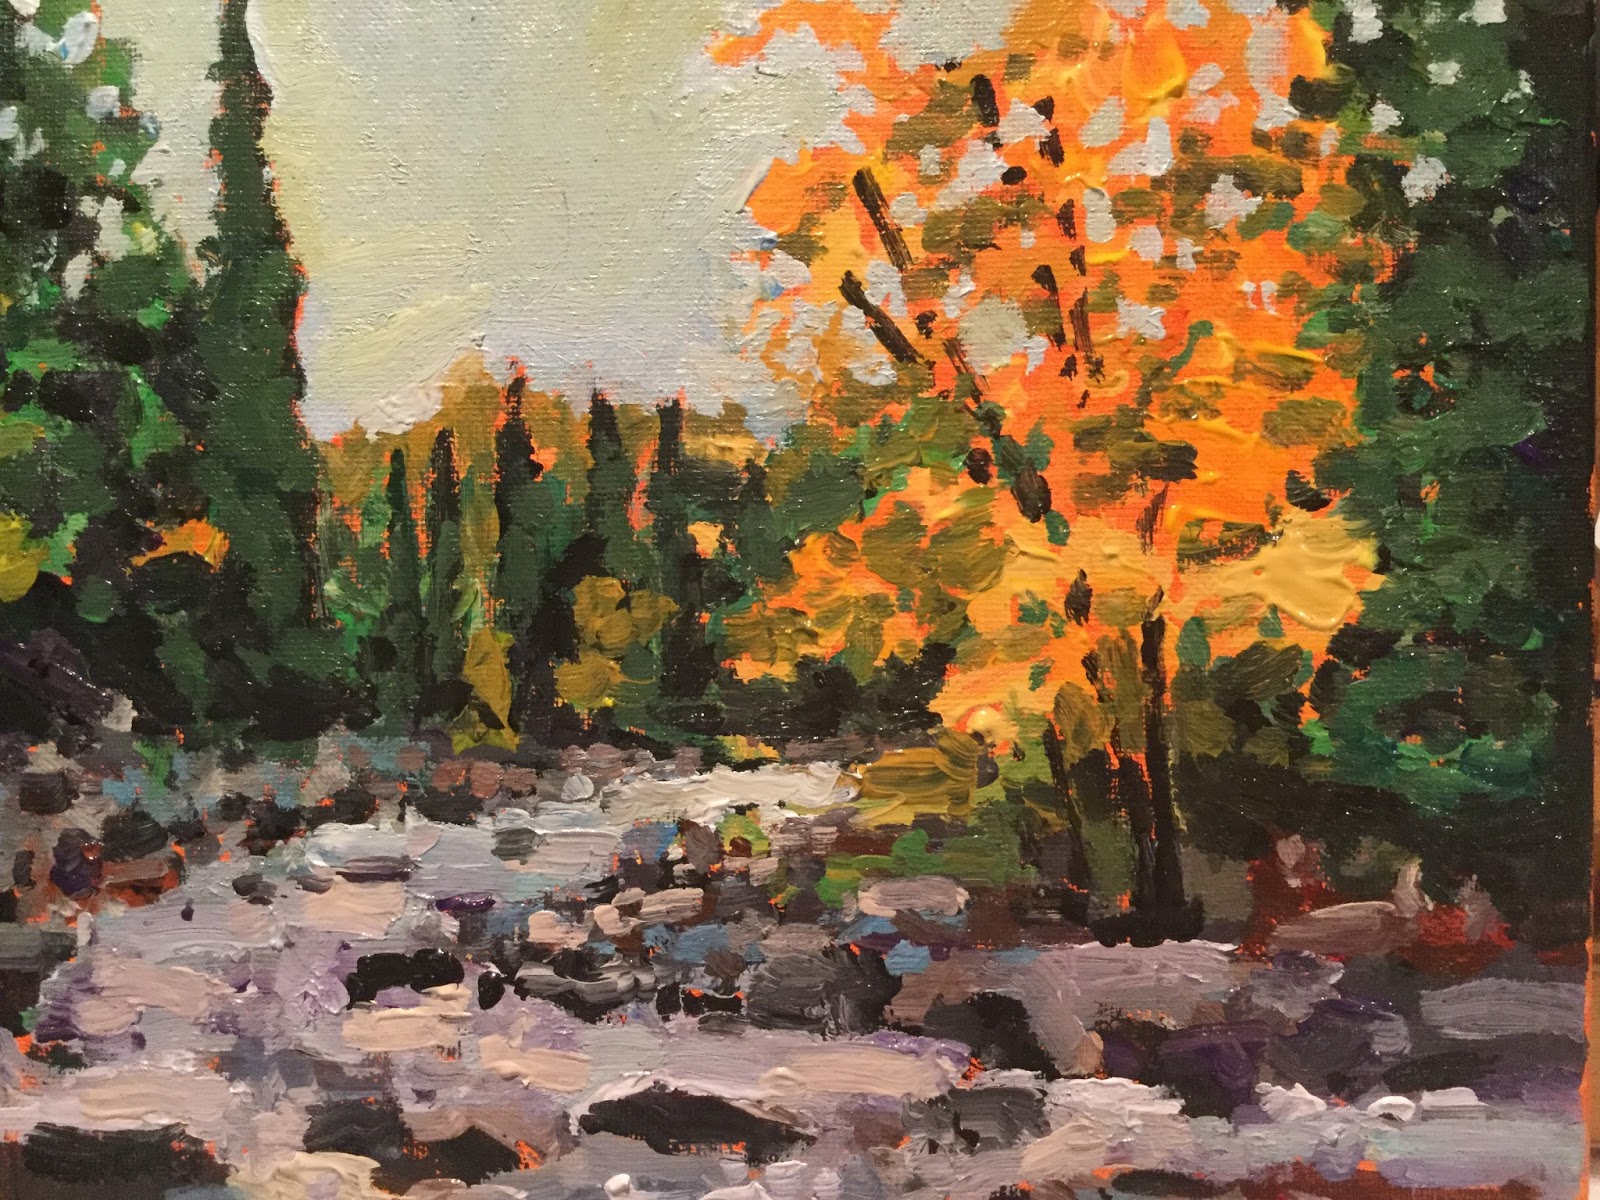 Rod Borghese Gallery: Autumn Stream by Rod Borghese August 2016